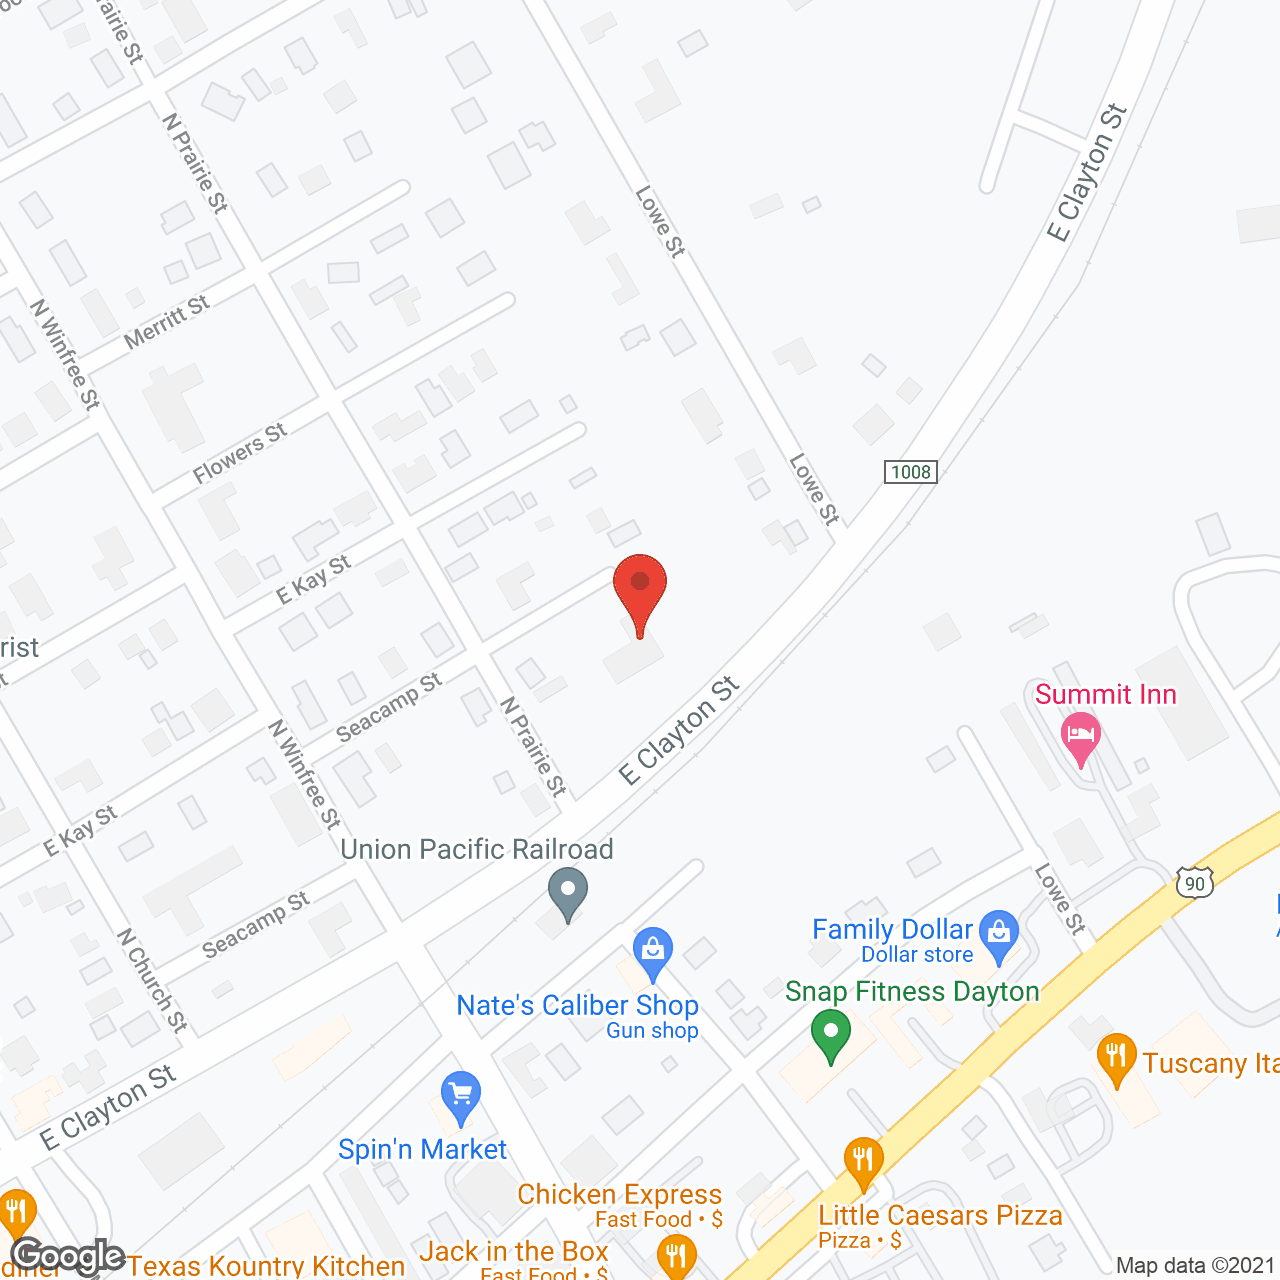 Brighter Days in google map